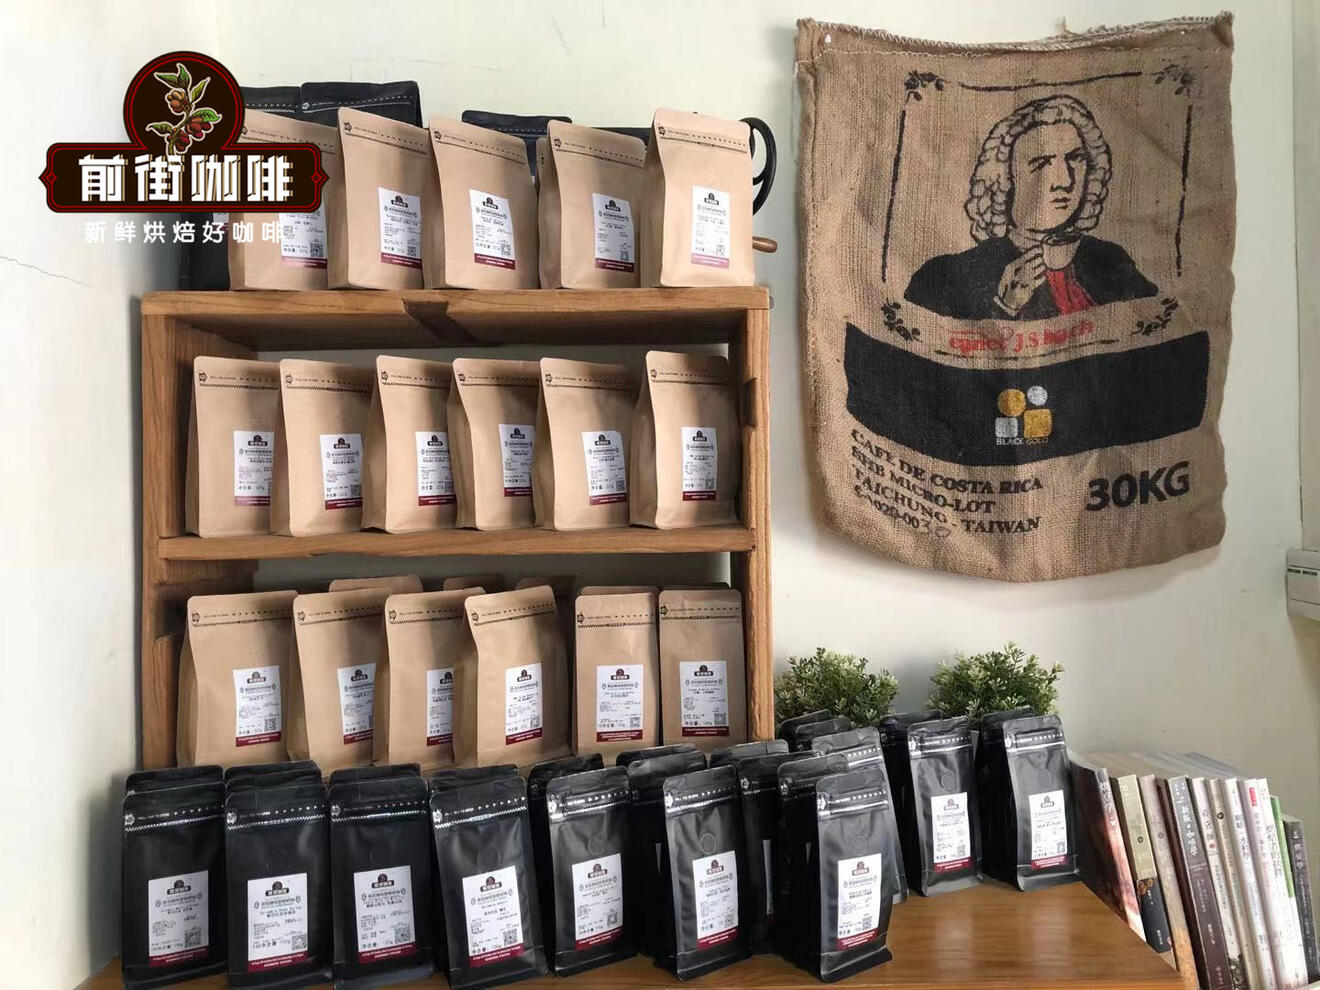 Cheap and delicious coffee? The rations of Qianjie coffee are beans.